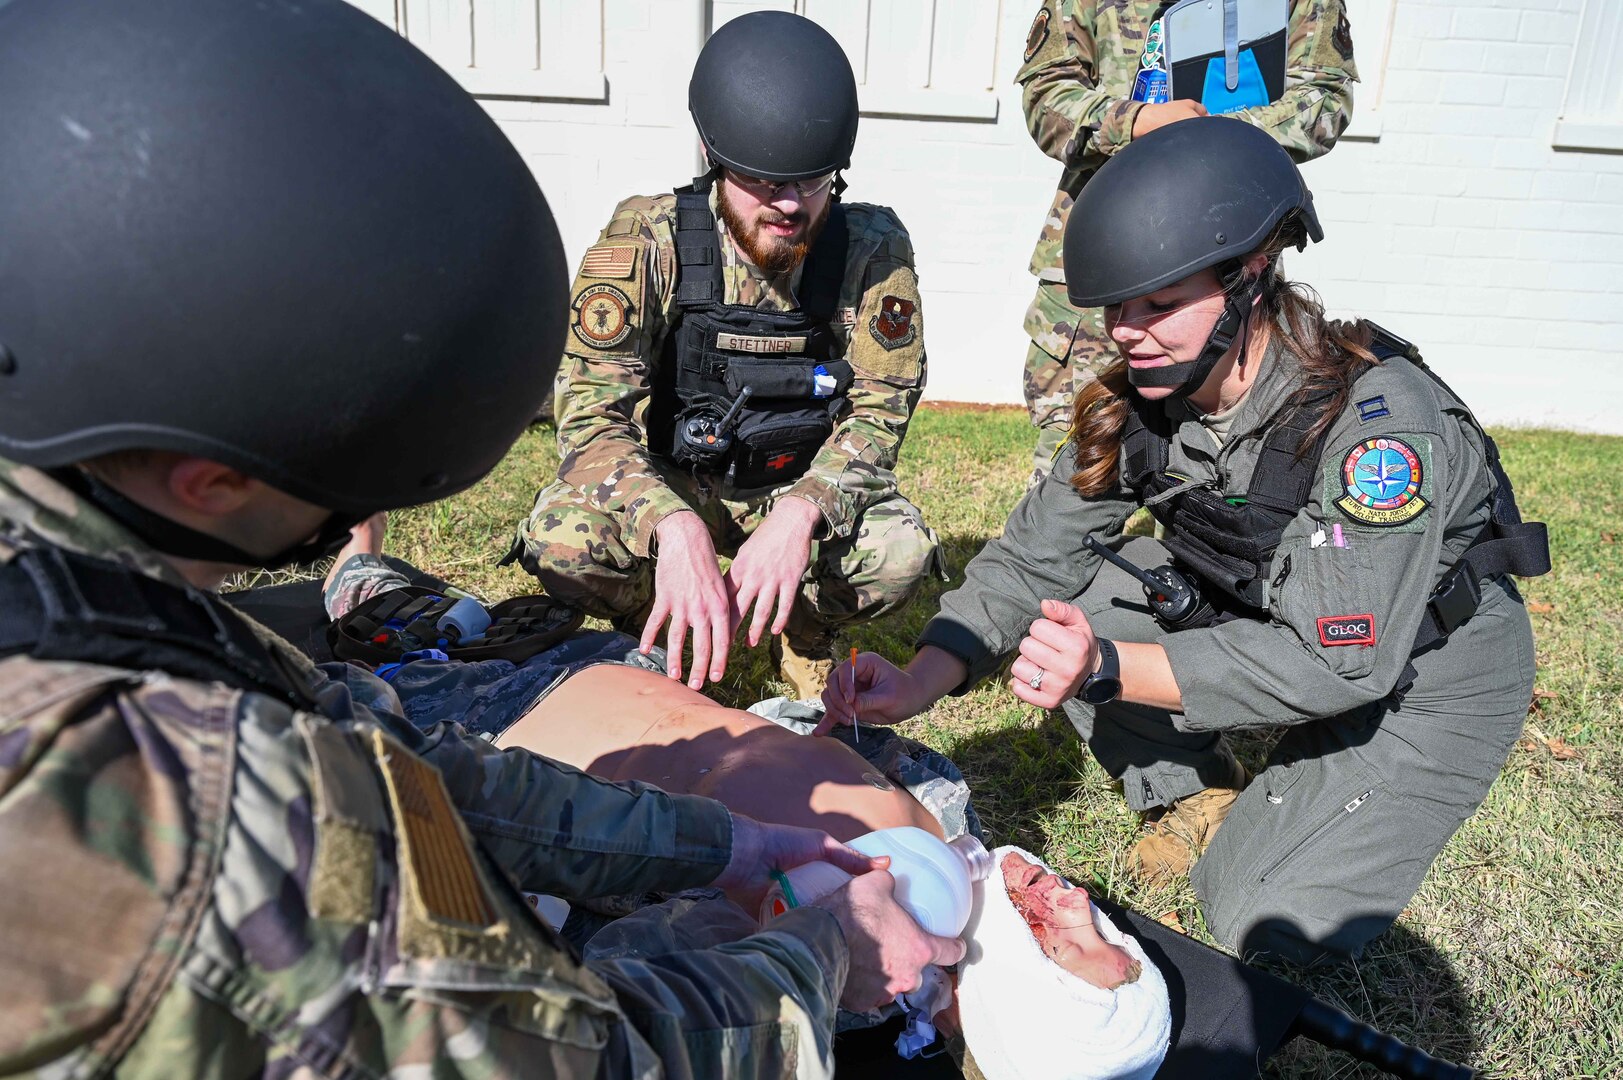 U.S. Air Force Capt. Alyssa Brown, 82nd Medical Group (MDG) flight surgeon, shows Airman 1st Class Ethan Stettner, 97th MDG dental technician, how to do a needle thoracostomy on a mannequin during the Caduceus Spear exercise at Clinton Sherman Airfield Park, Oklahoma, Oct. 26, 2023. Leaders from the 97th MDG intended to utilize both medics and non-medics to safely transport injured individuals to a higher level of care facility while providing critical first aid by Tactical Combat Casualty Care and MEDIC-X training. (U.S. Air Force photo by Airman 1st Class Kari Degraffenreed)